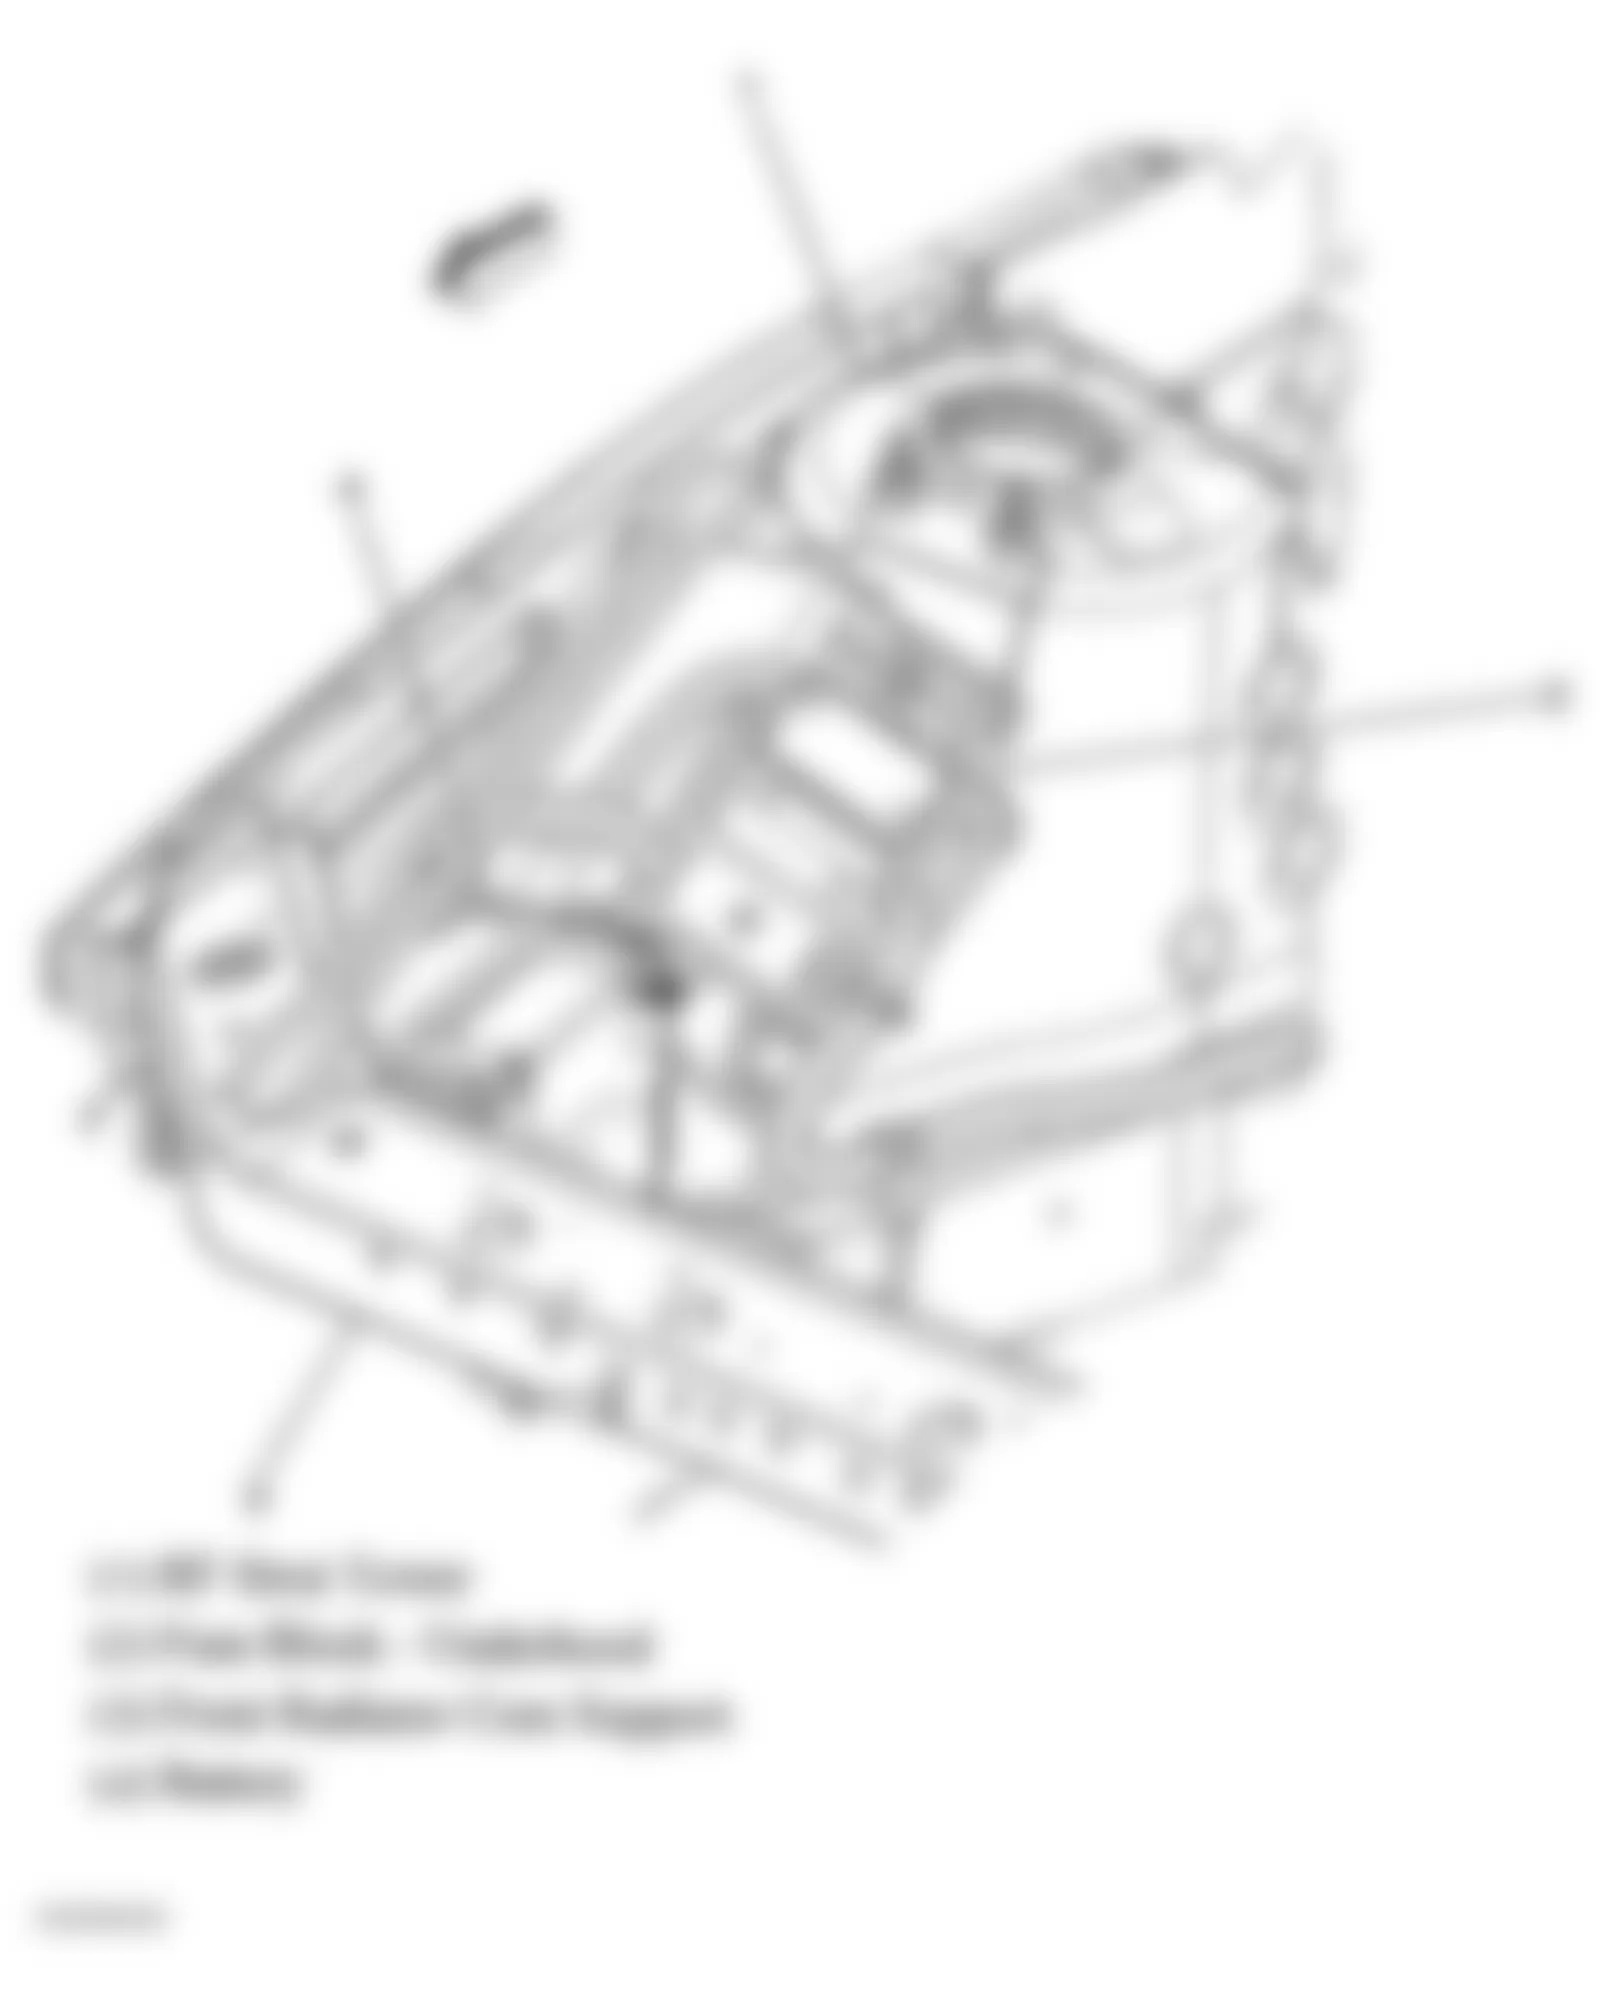 Buick Allure CXS 2005 - Component Locations -  Right Front Of Engine Compartment